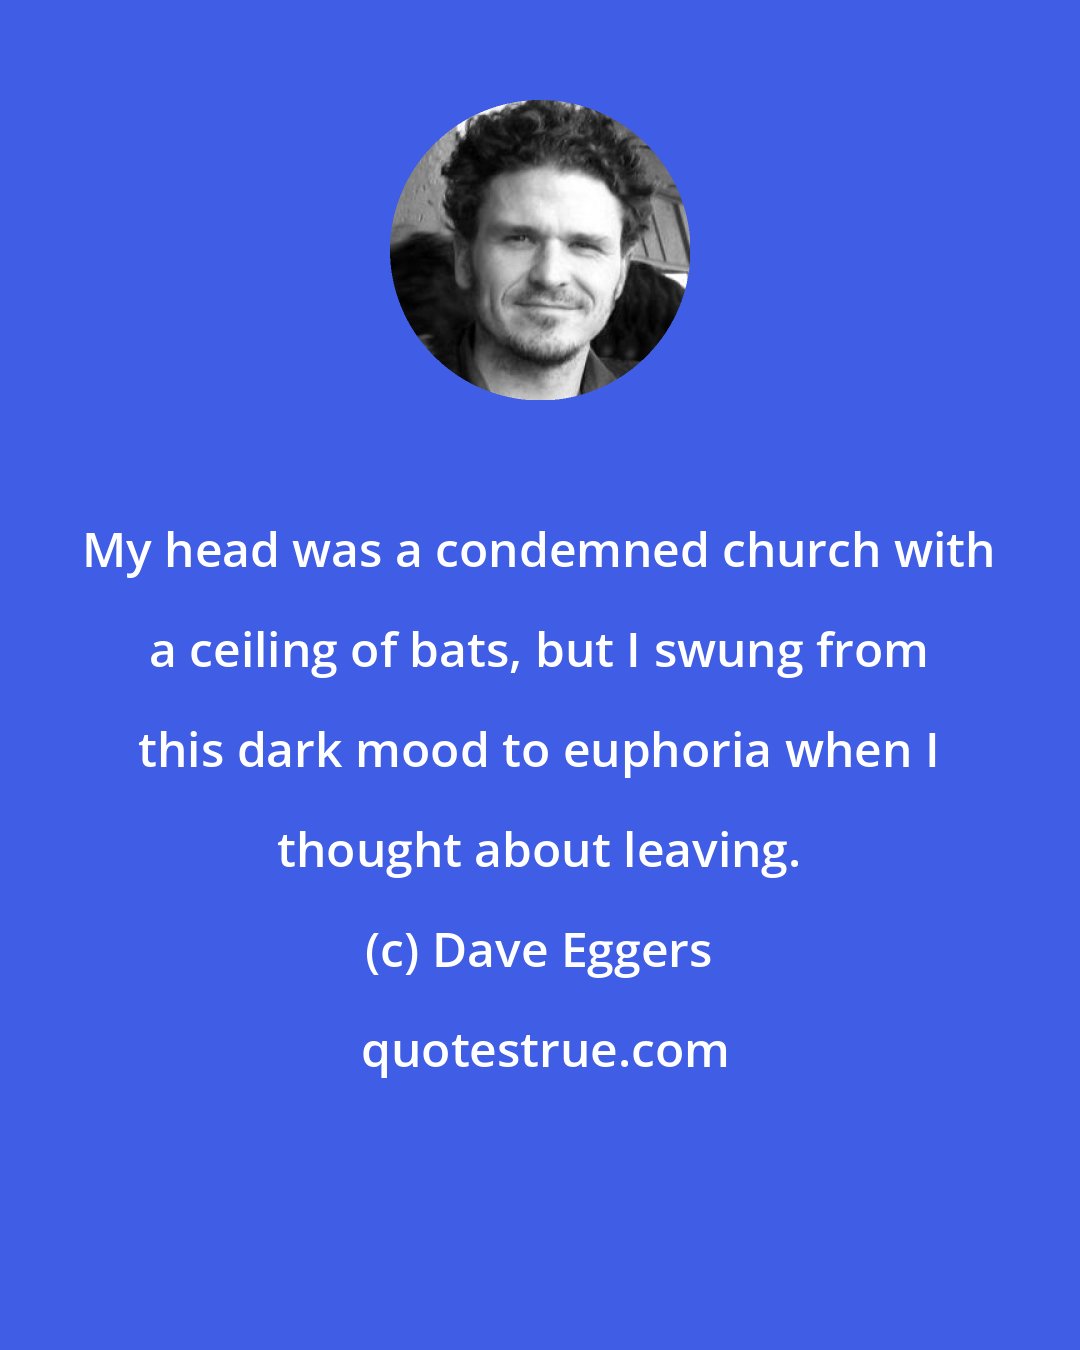 Dave Eggers: My head was a condemned church with a ceiling of bats, but I swung from this dark mood to euphoria when I thought about leaving.